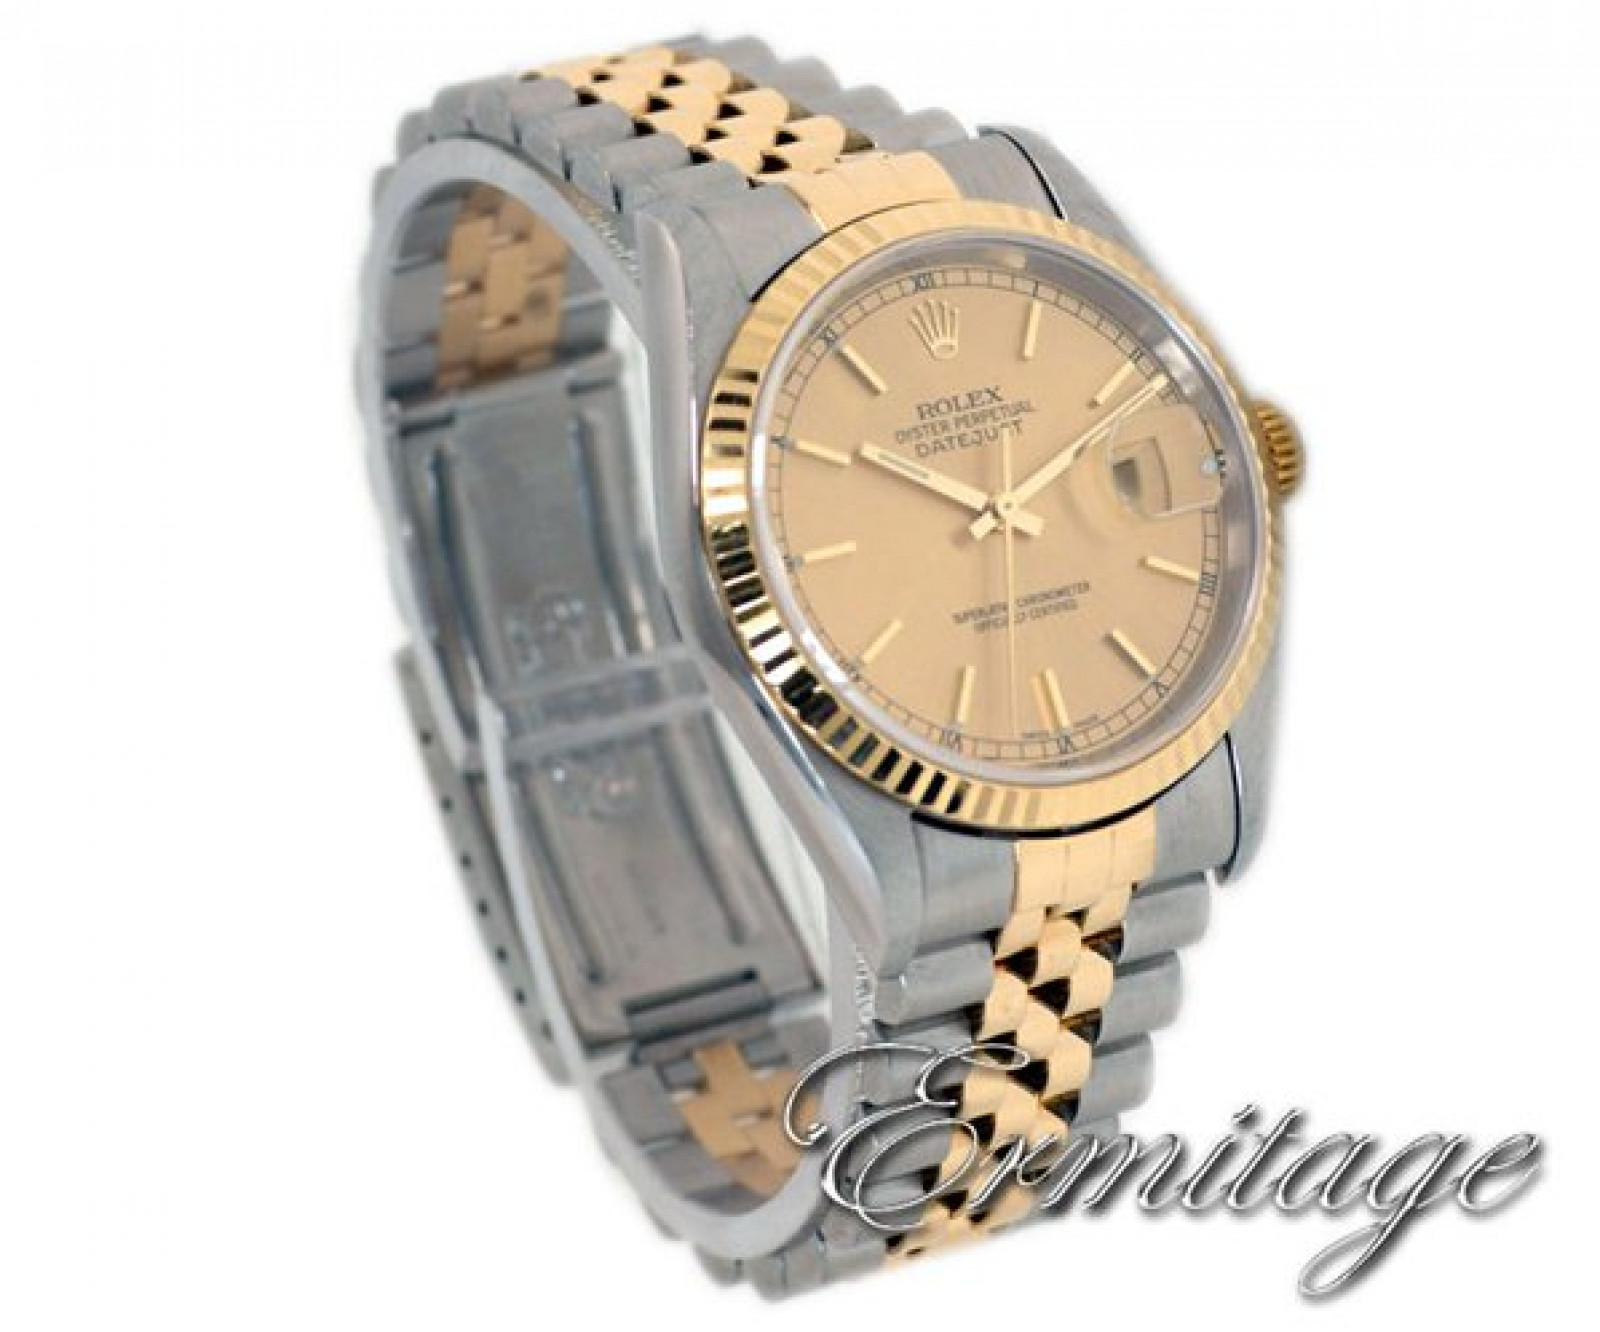 Rolex Datejust 16233 36 mm with Gold Index on Champagne